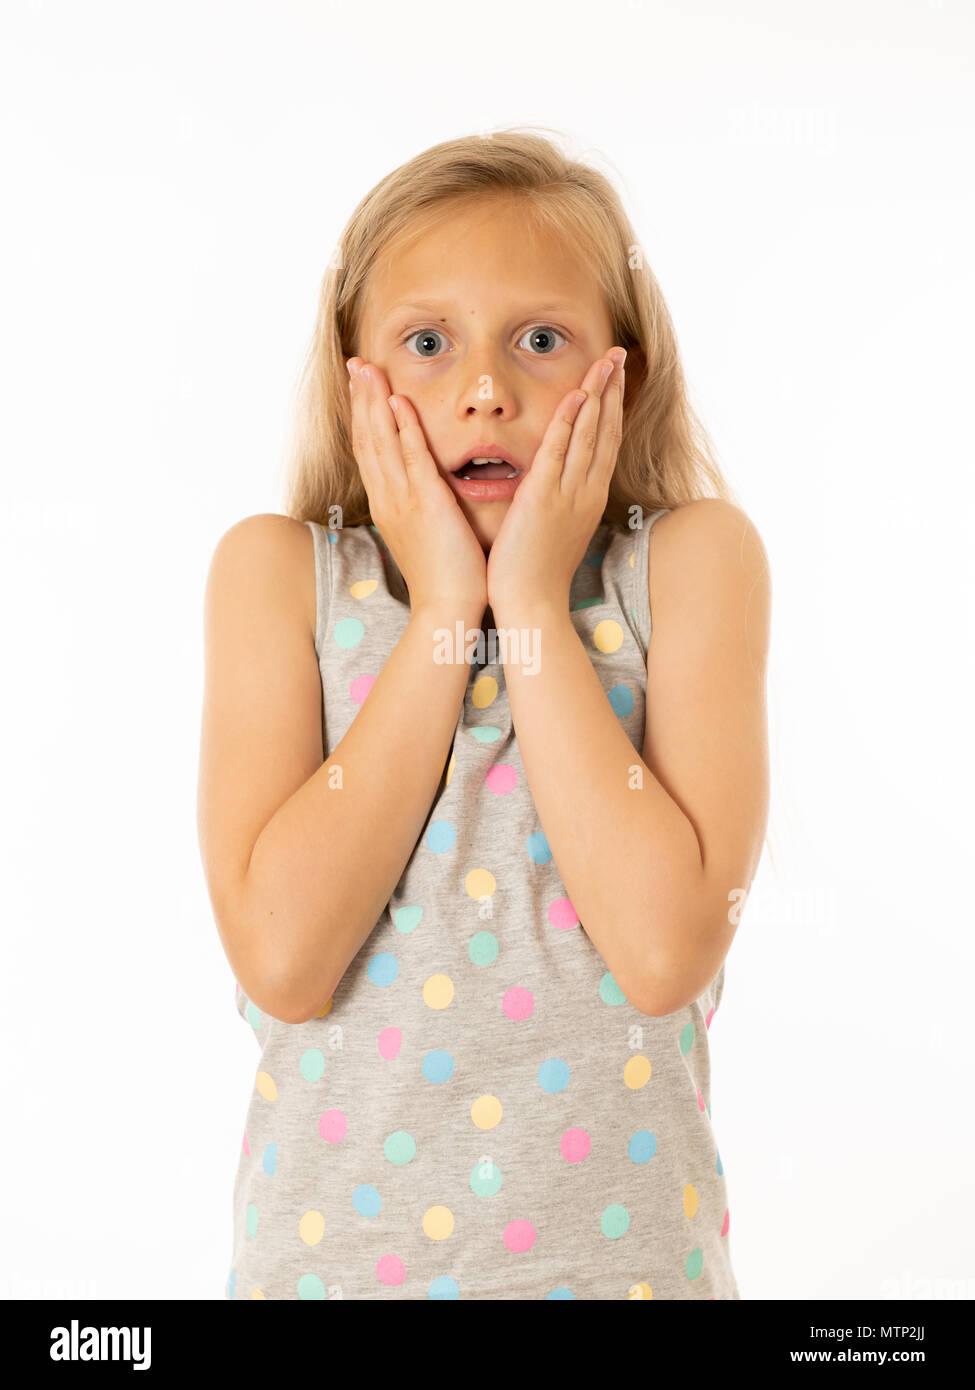 Close up portrait. Cute, scared young kid with a shocked, surprised face with fear. Human emotions, body language and facial expressions. White backgr Stock Photo